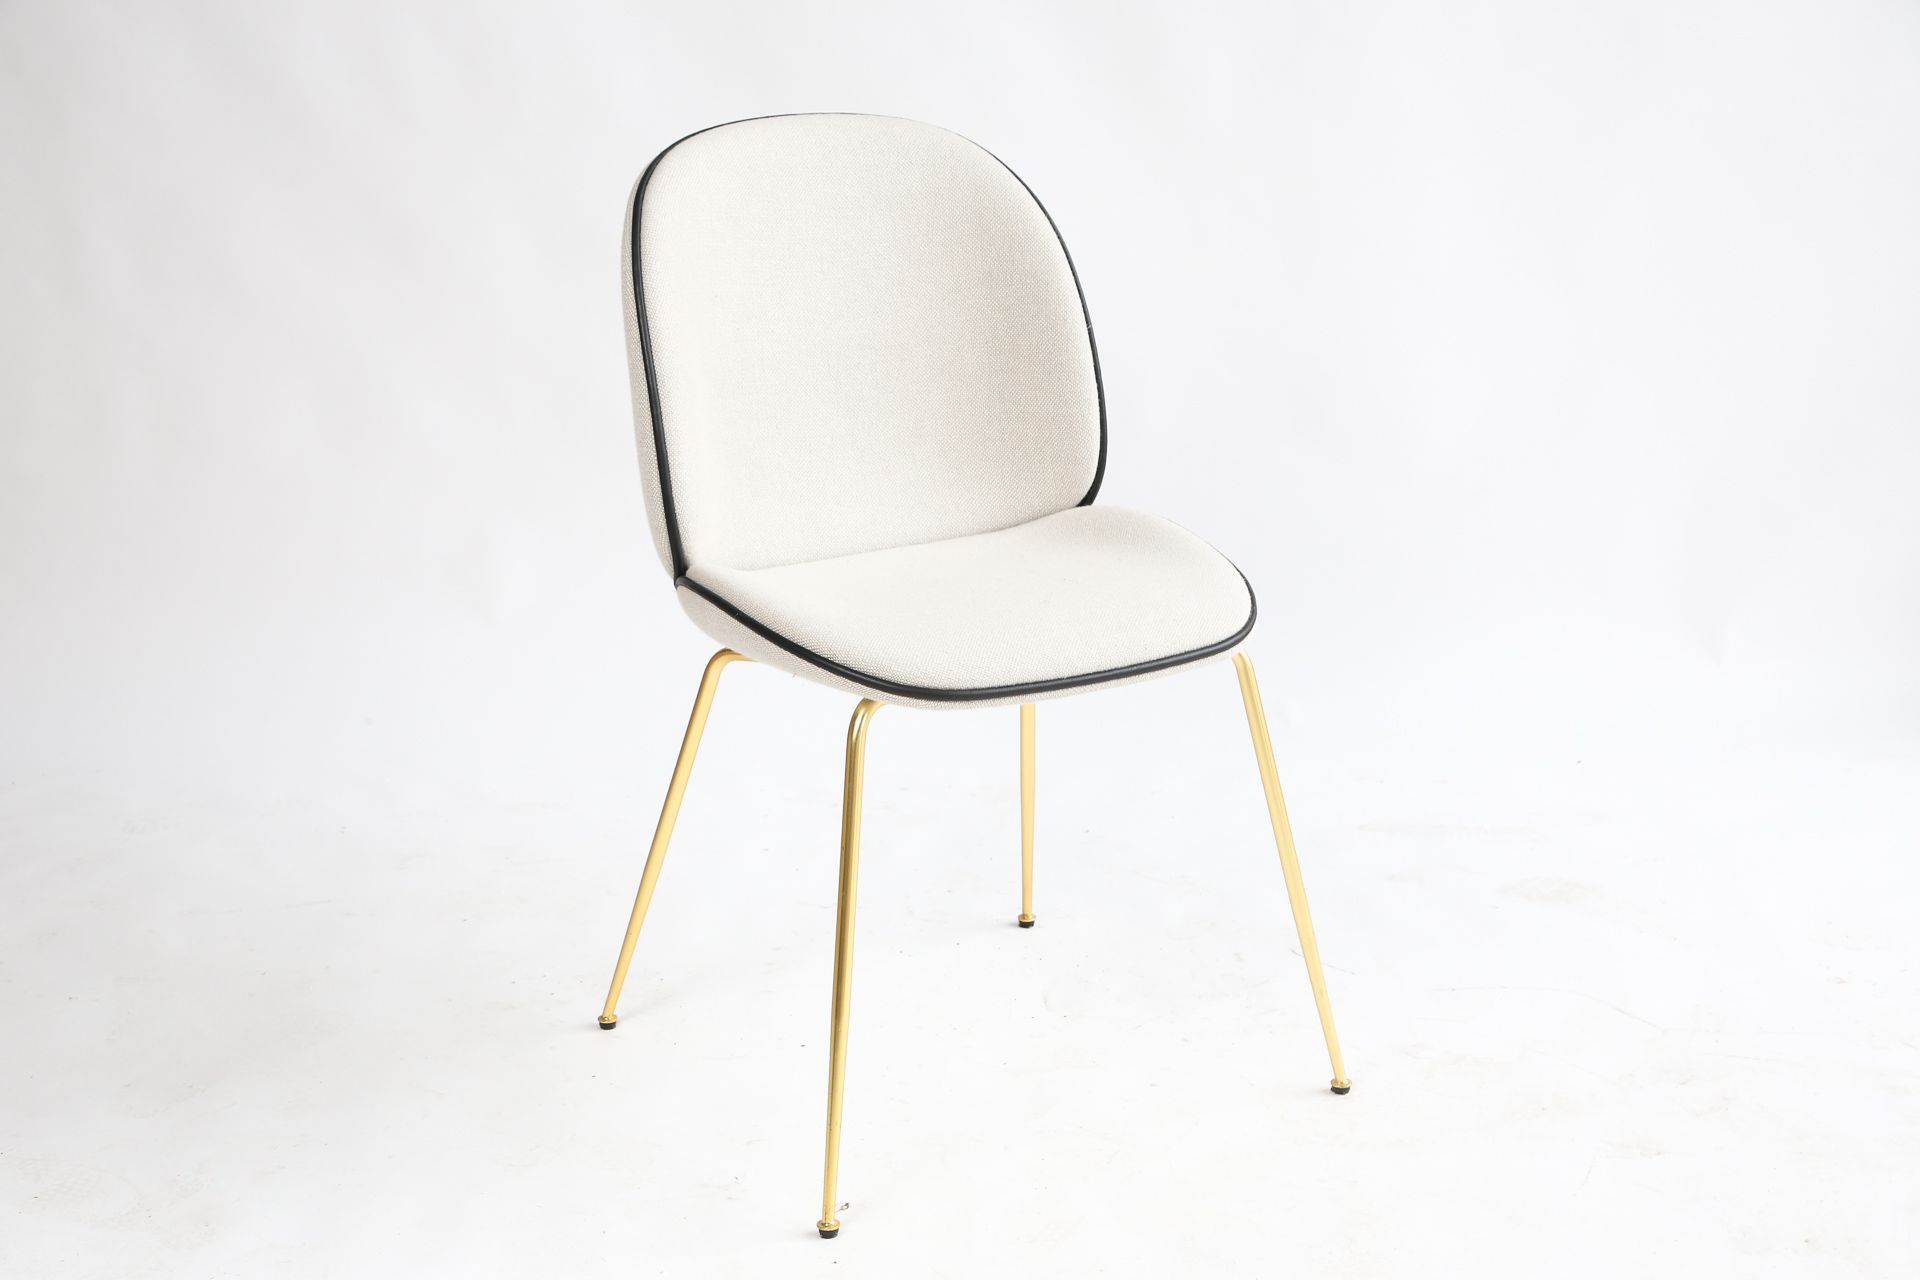 Null GUBI, Beetle Dining Chair - Fully Upholstered, conic base

Gubi

4 pieds co&hellip;